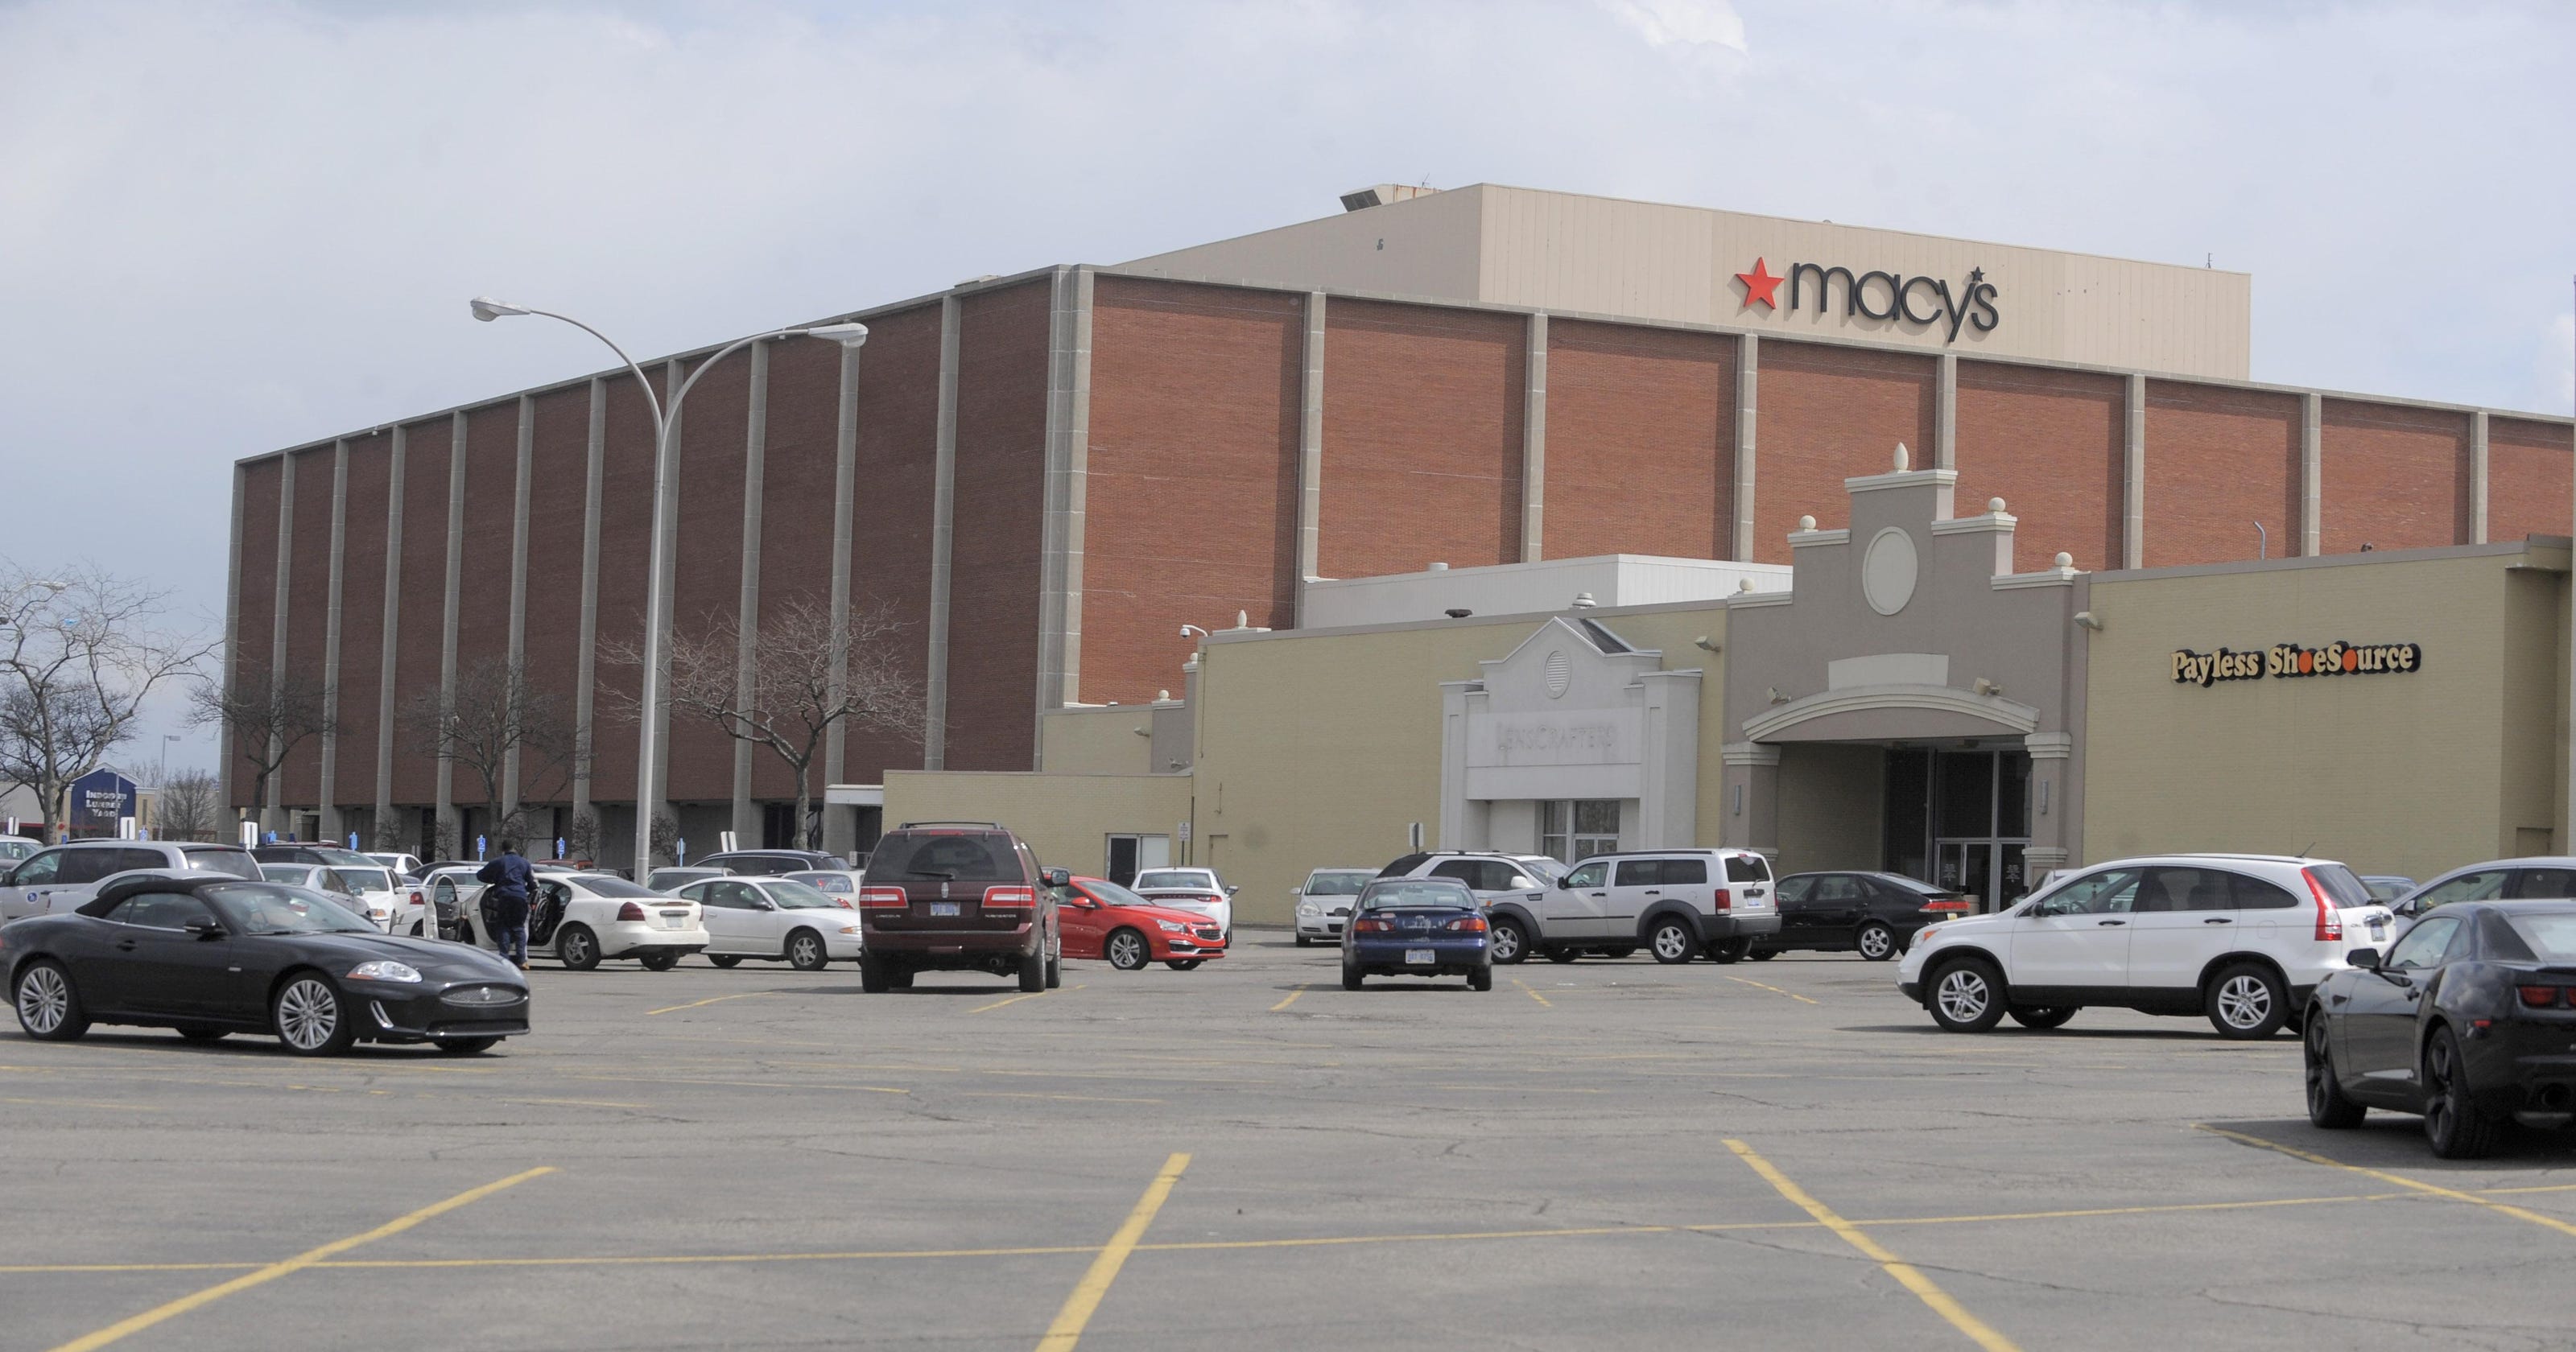 Some Detroit Area Macy S Kmart Stores Closing